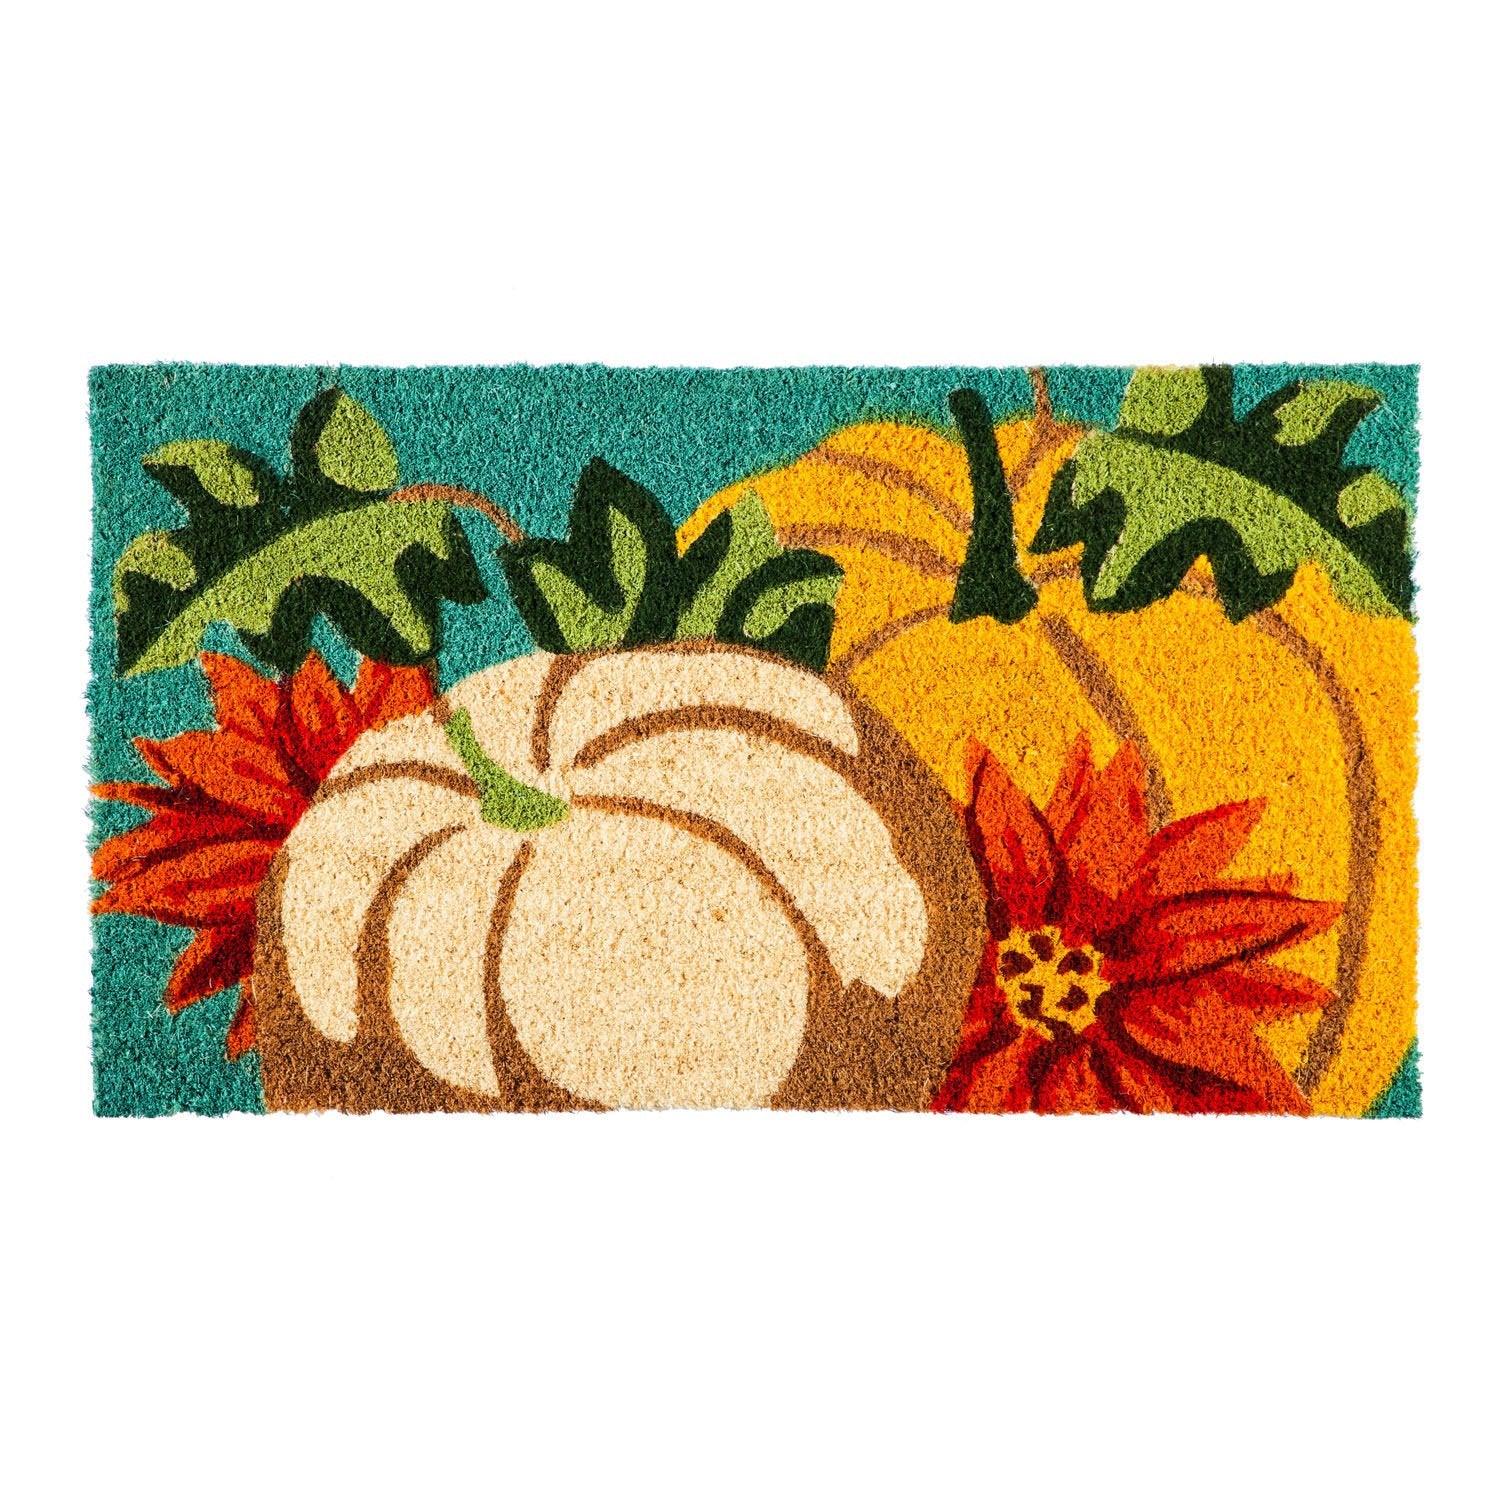 Welcome guests with a splash of autumn cheer. These soft coir mats feature vibrant pumpkins and seasonal accents to add a warm touch to any front door. Measures 16 x 28inches.